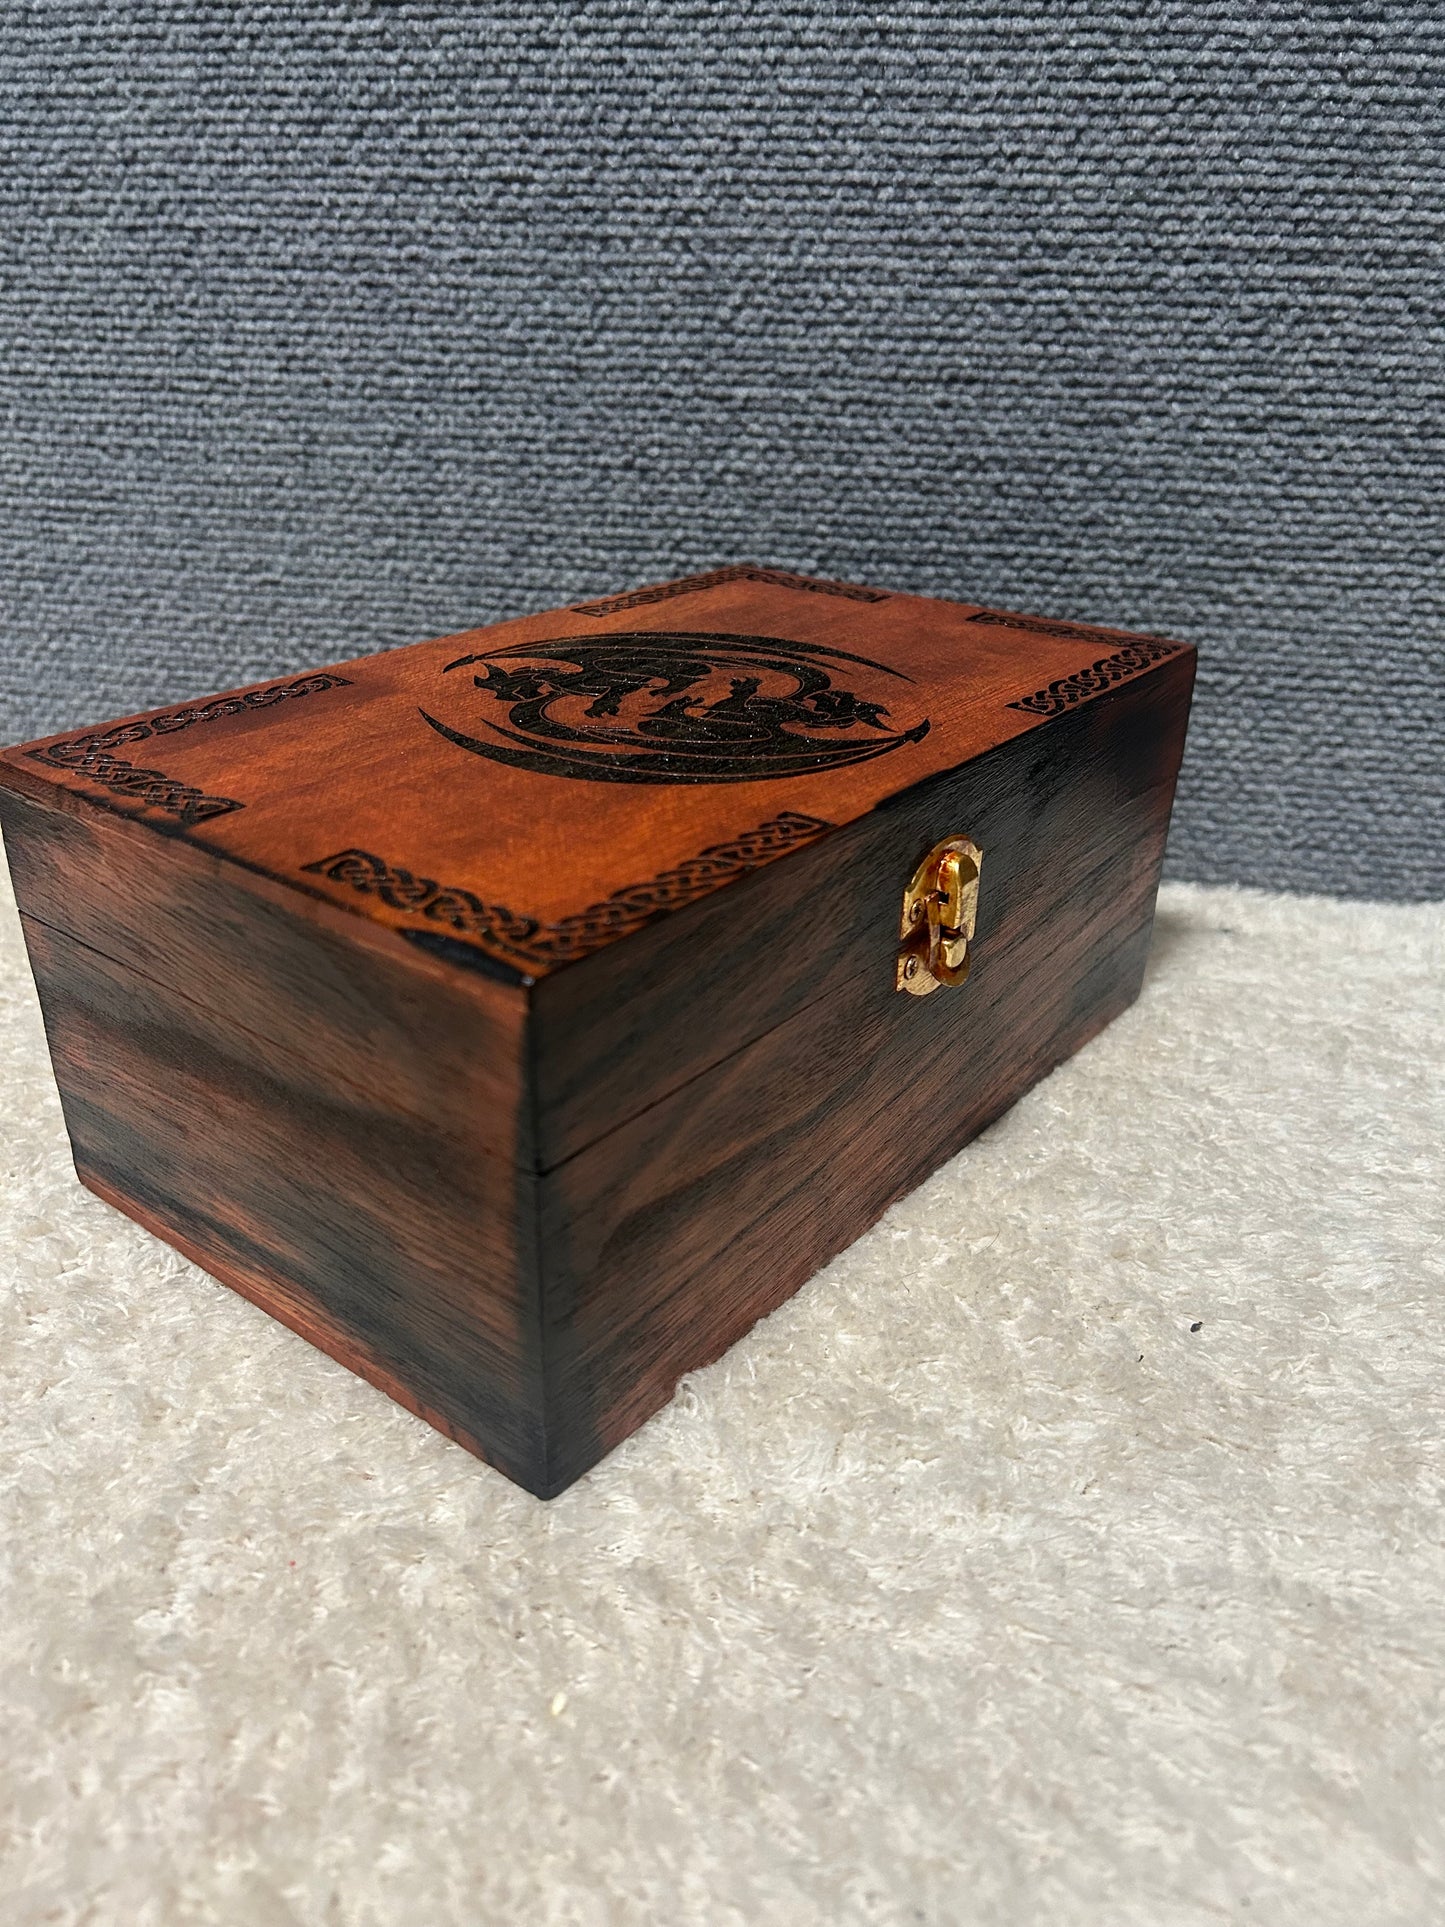 Entwined Dragons Box